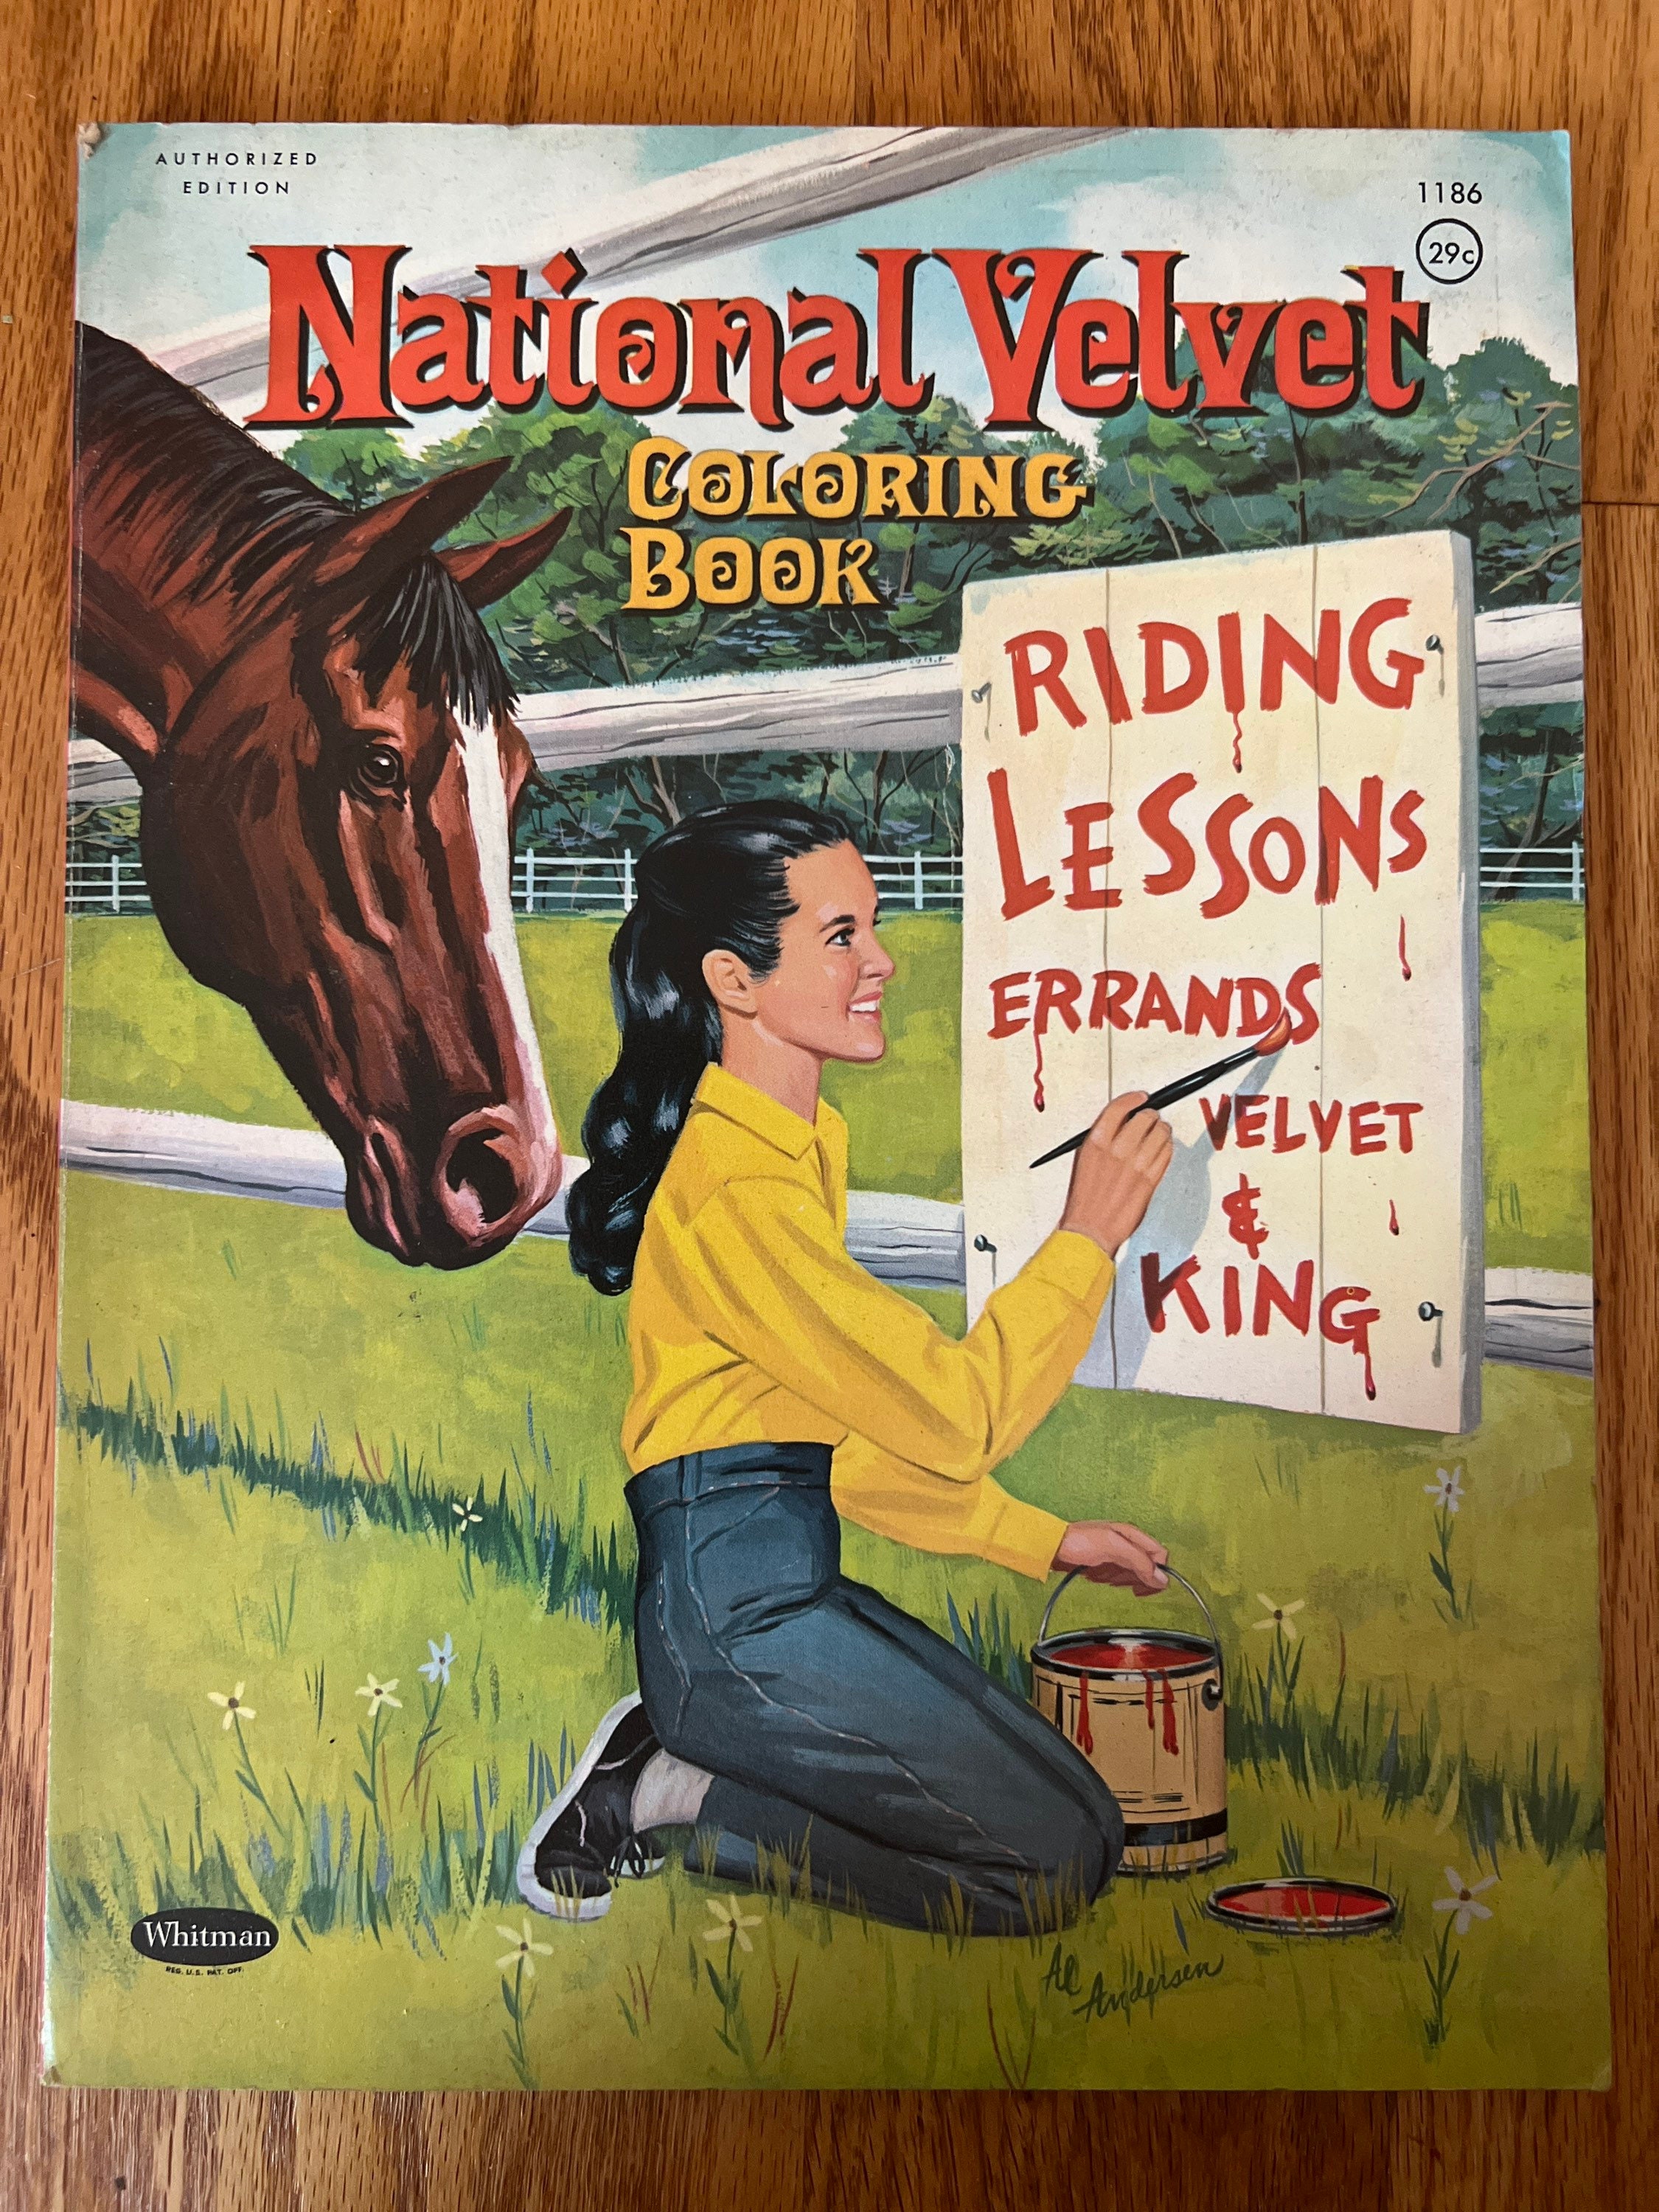 NATIONAL VELVET COLORING BOOK by Whitman Publishing Company